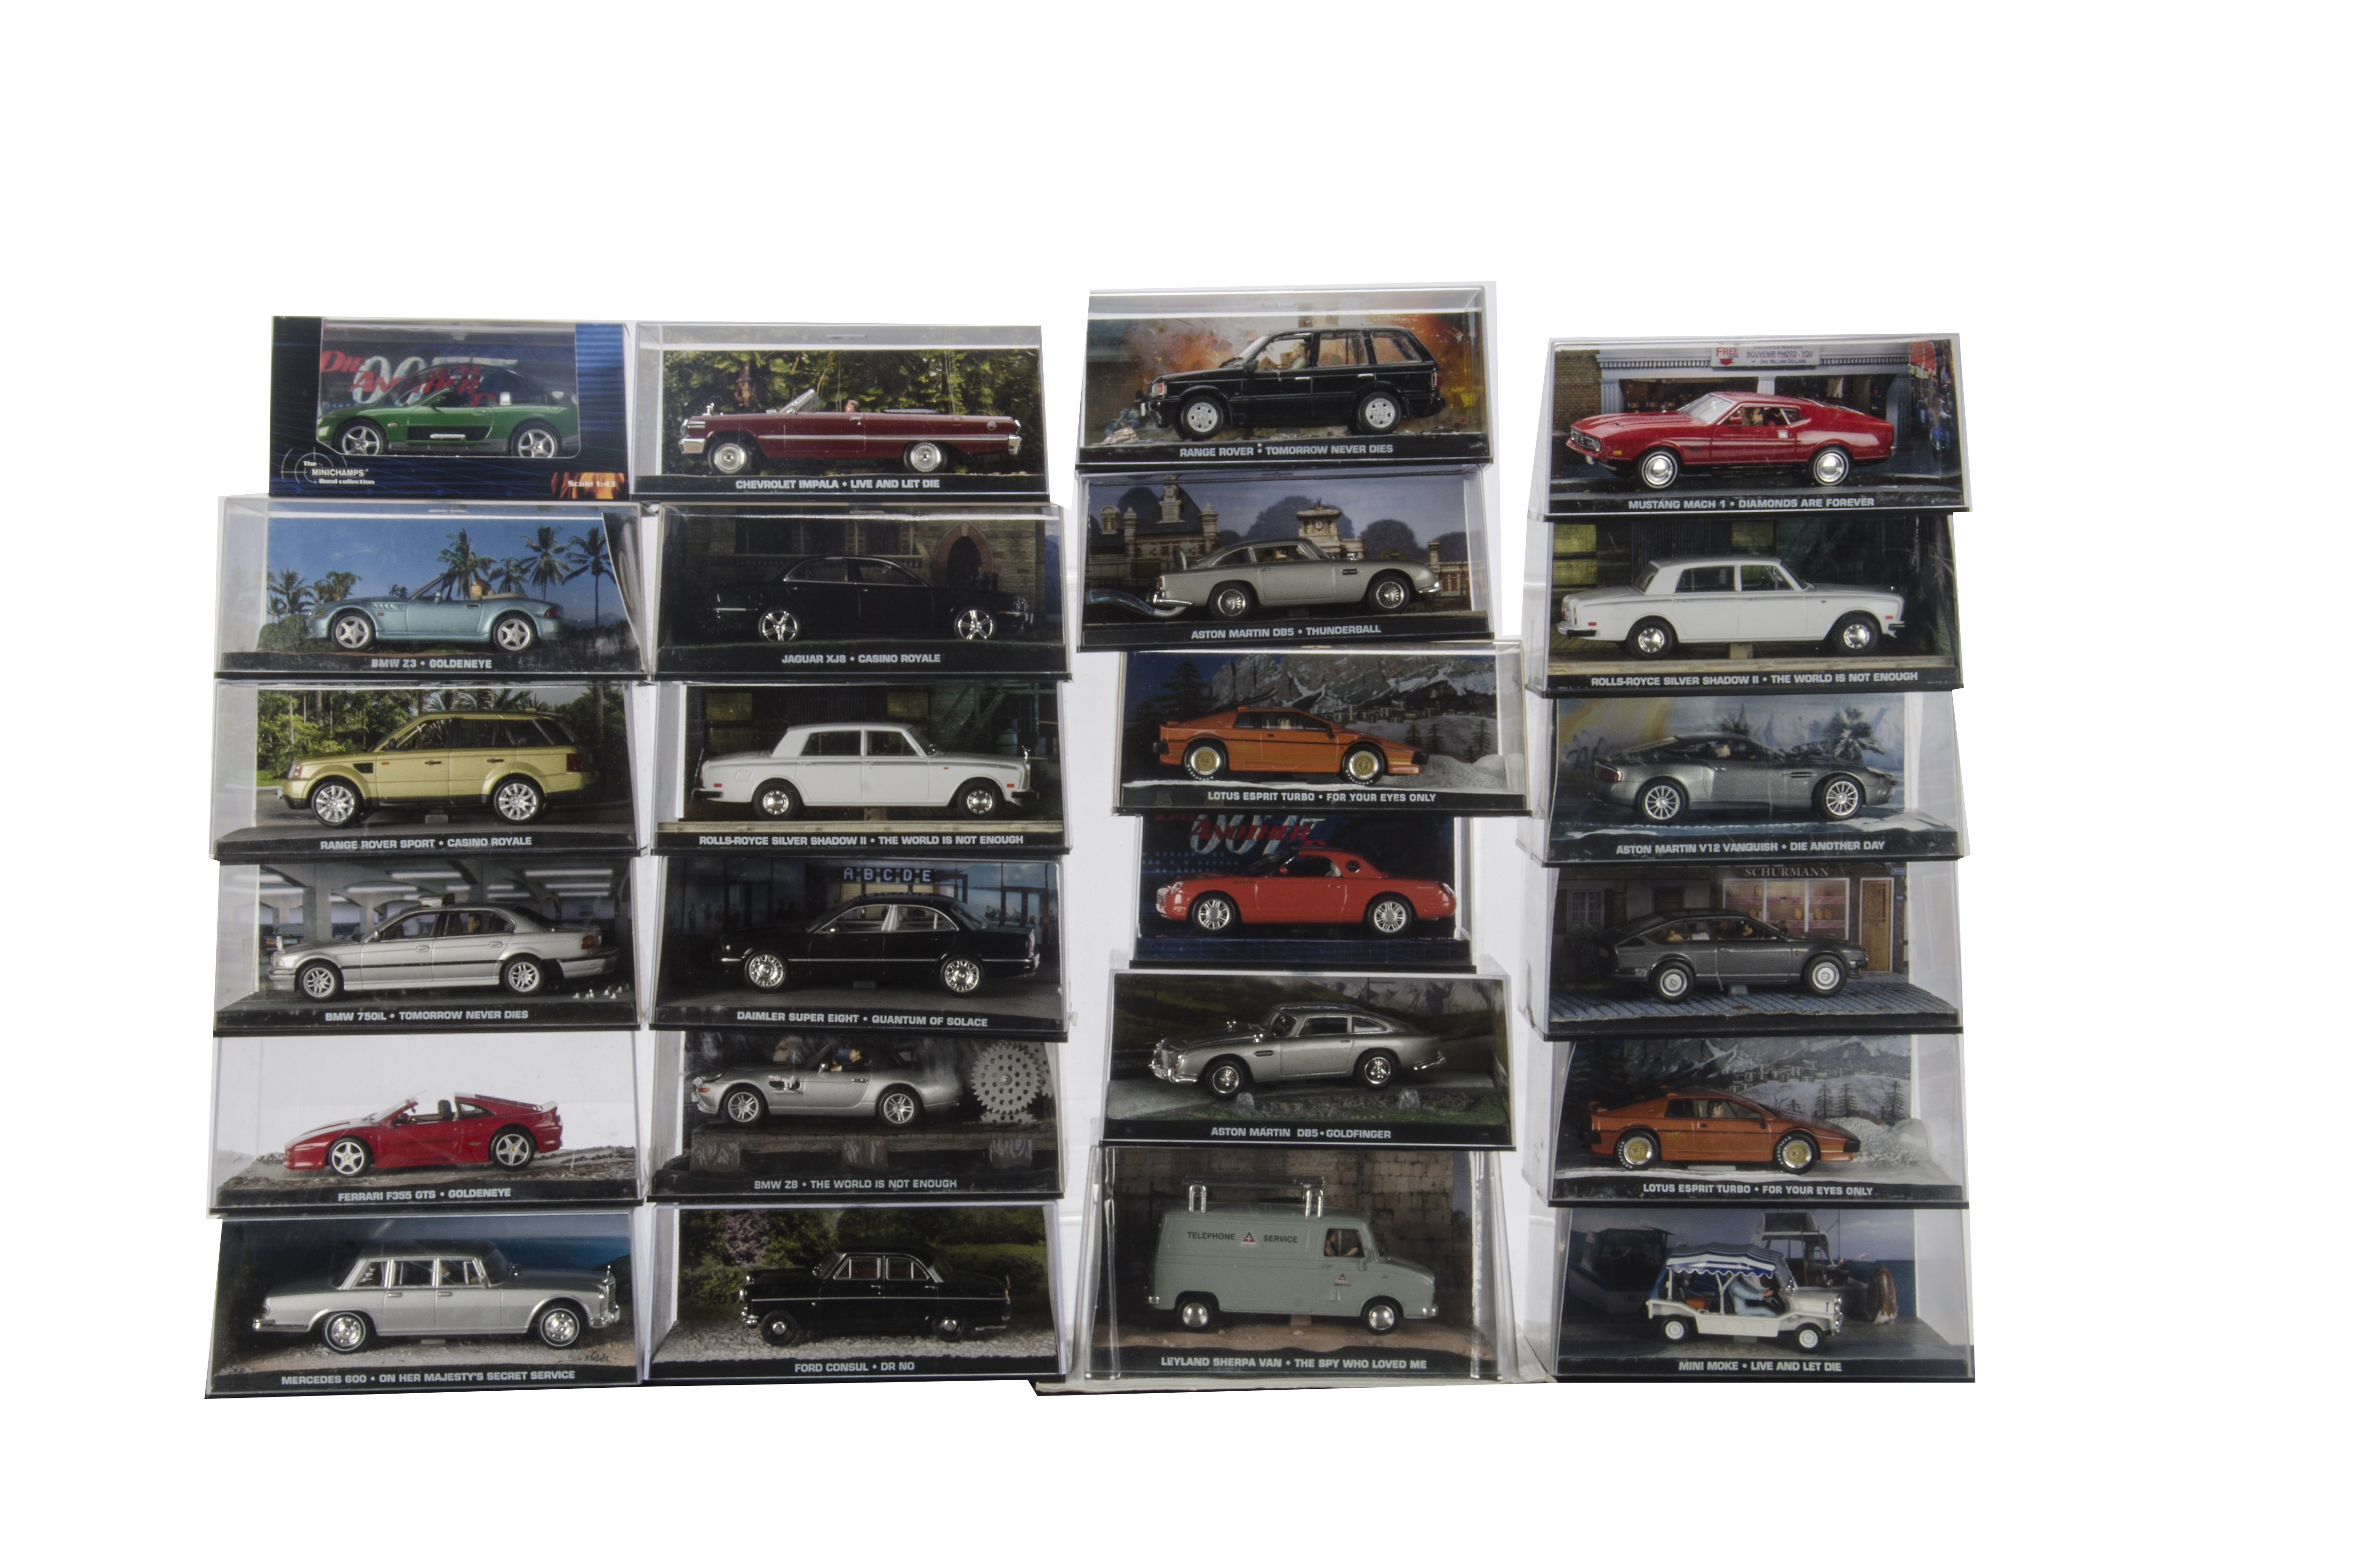 James Bond Themed Vehicles, by Minichamps, EON Productions and others, including a BMW 75Oil from '